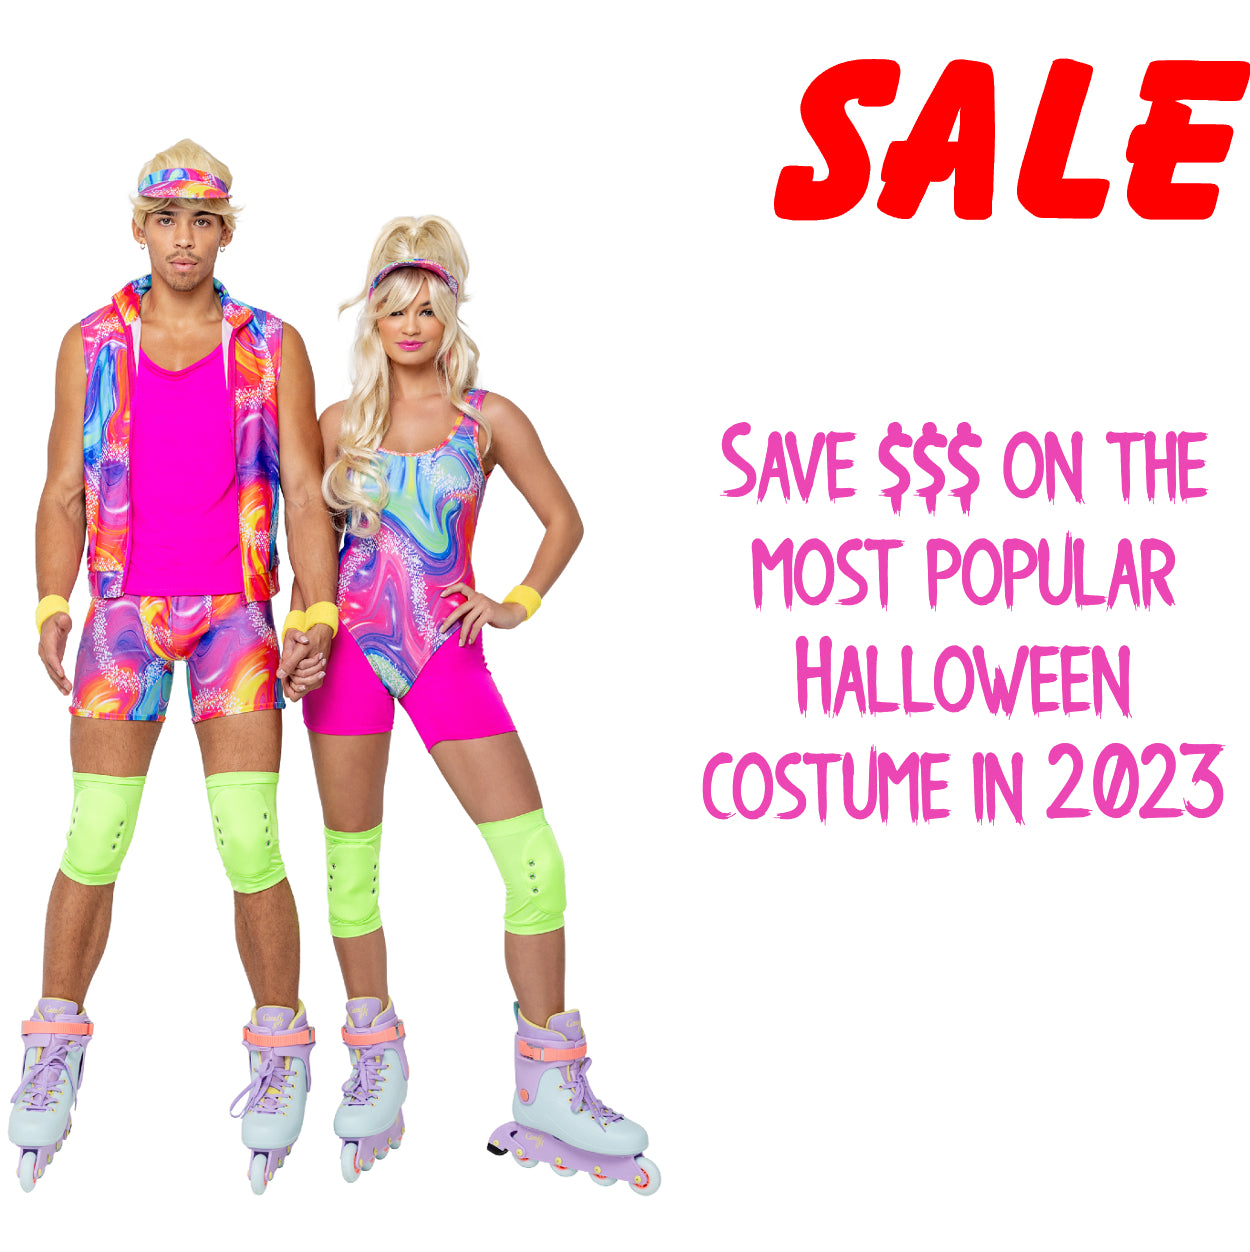 Rollerblade Barbie 5 Piece Set Costume by ROMA in Size Small or Medium